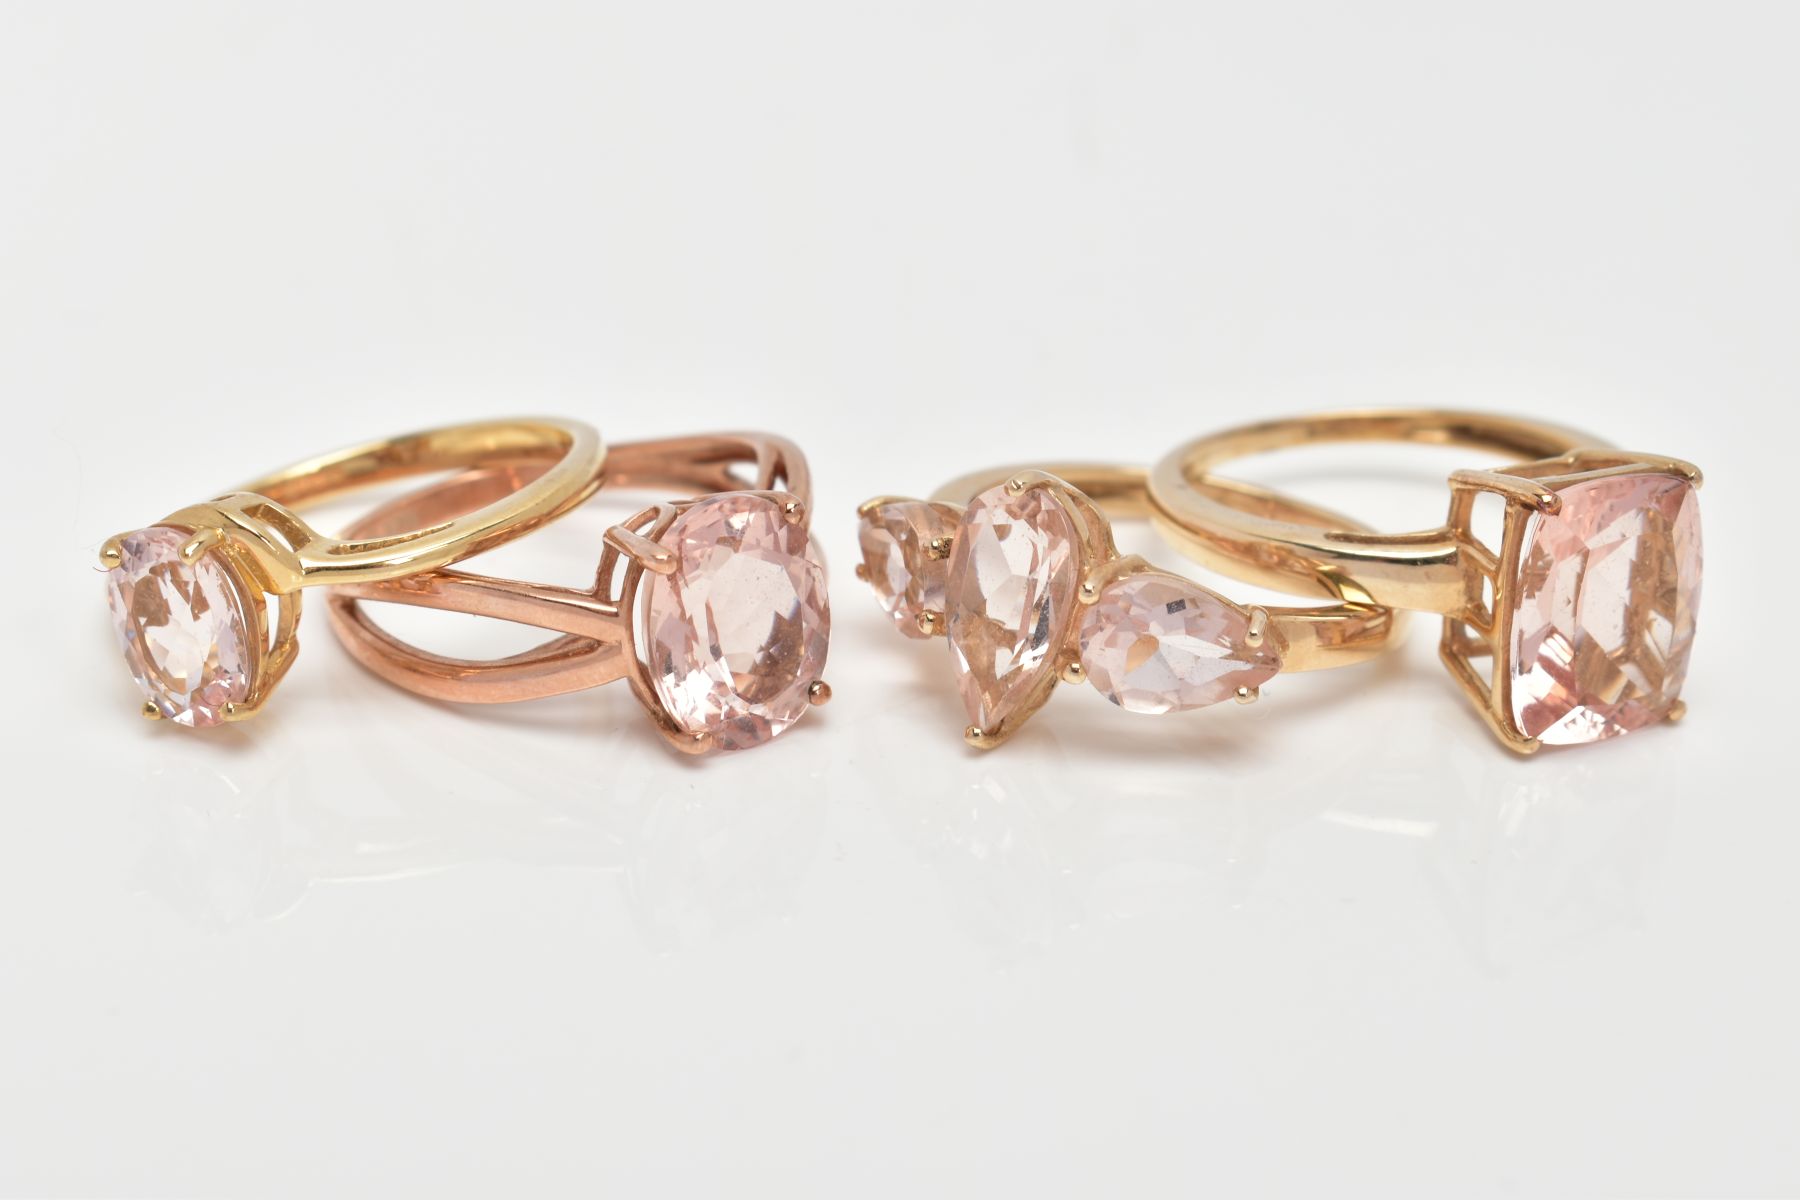 FOUR 9CT GOLD MORGANITE SET DRESS RINGS, each of various designs, set with vary cut morganite, one - Image 2 of 3